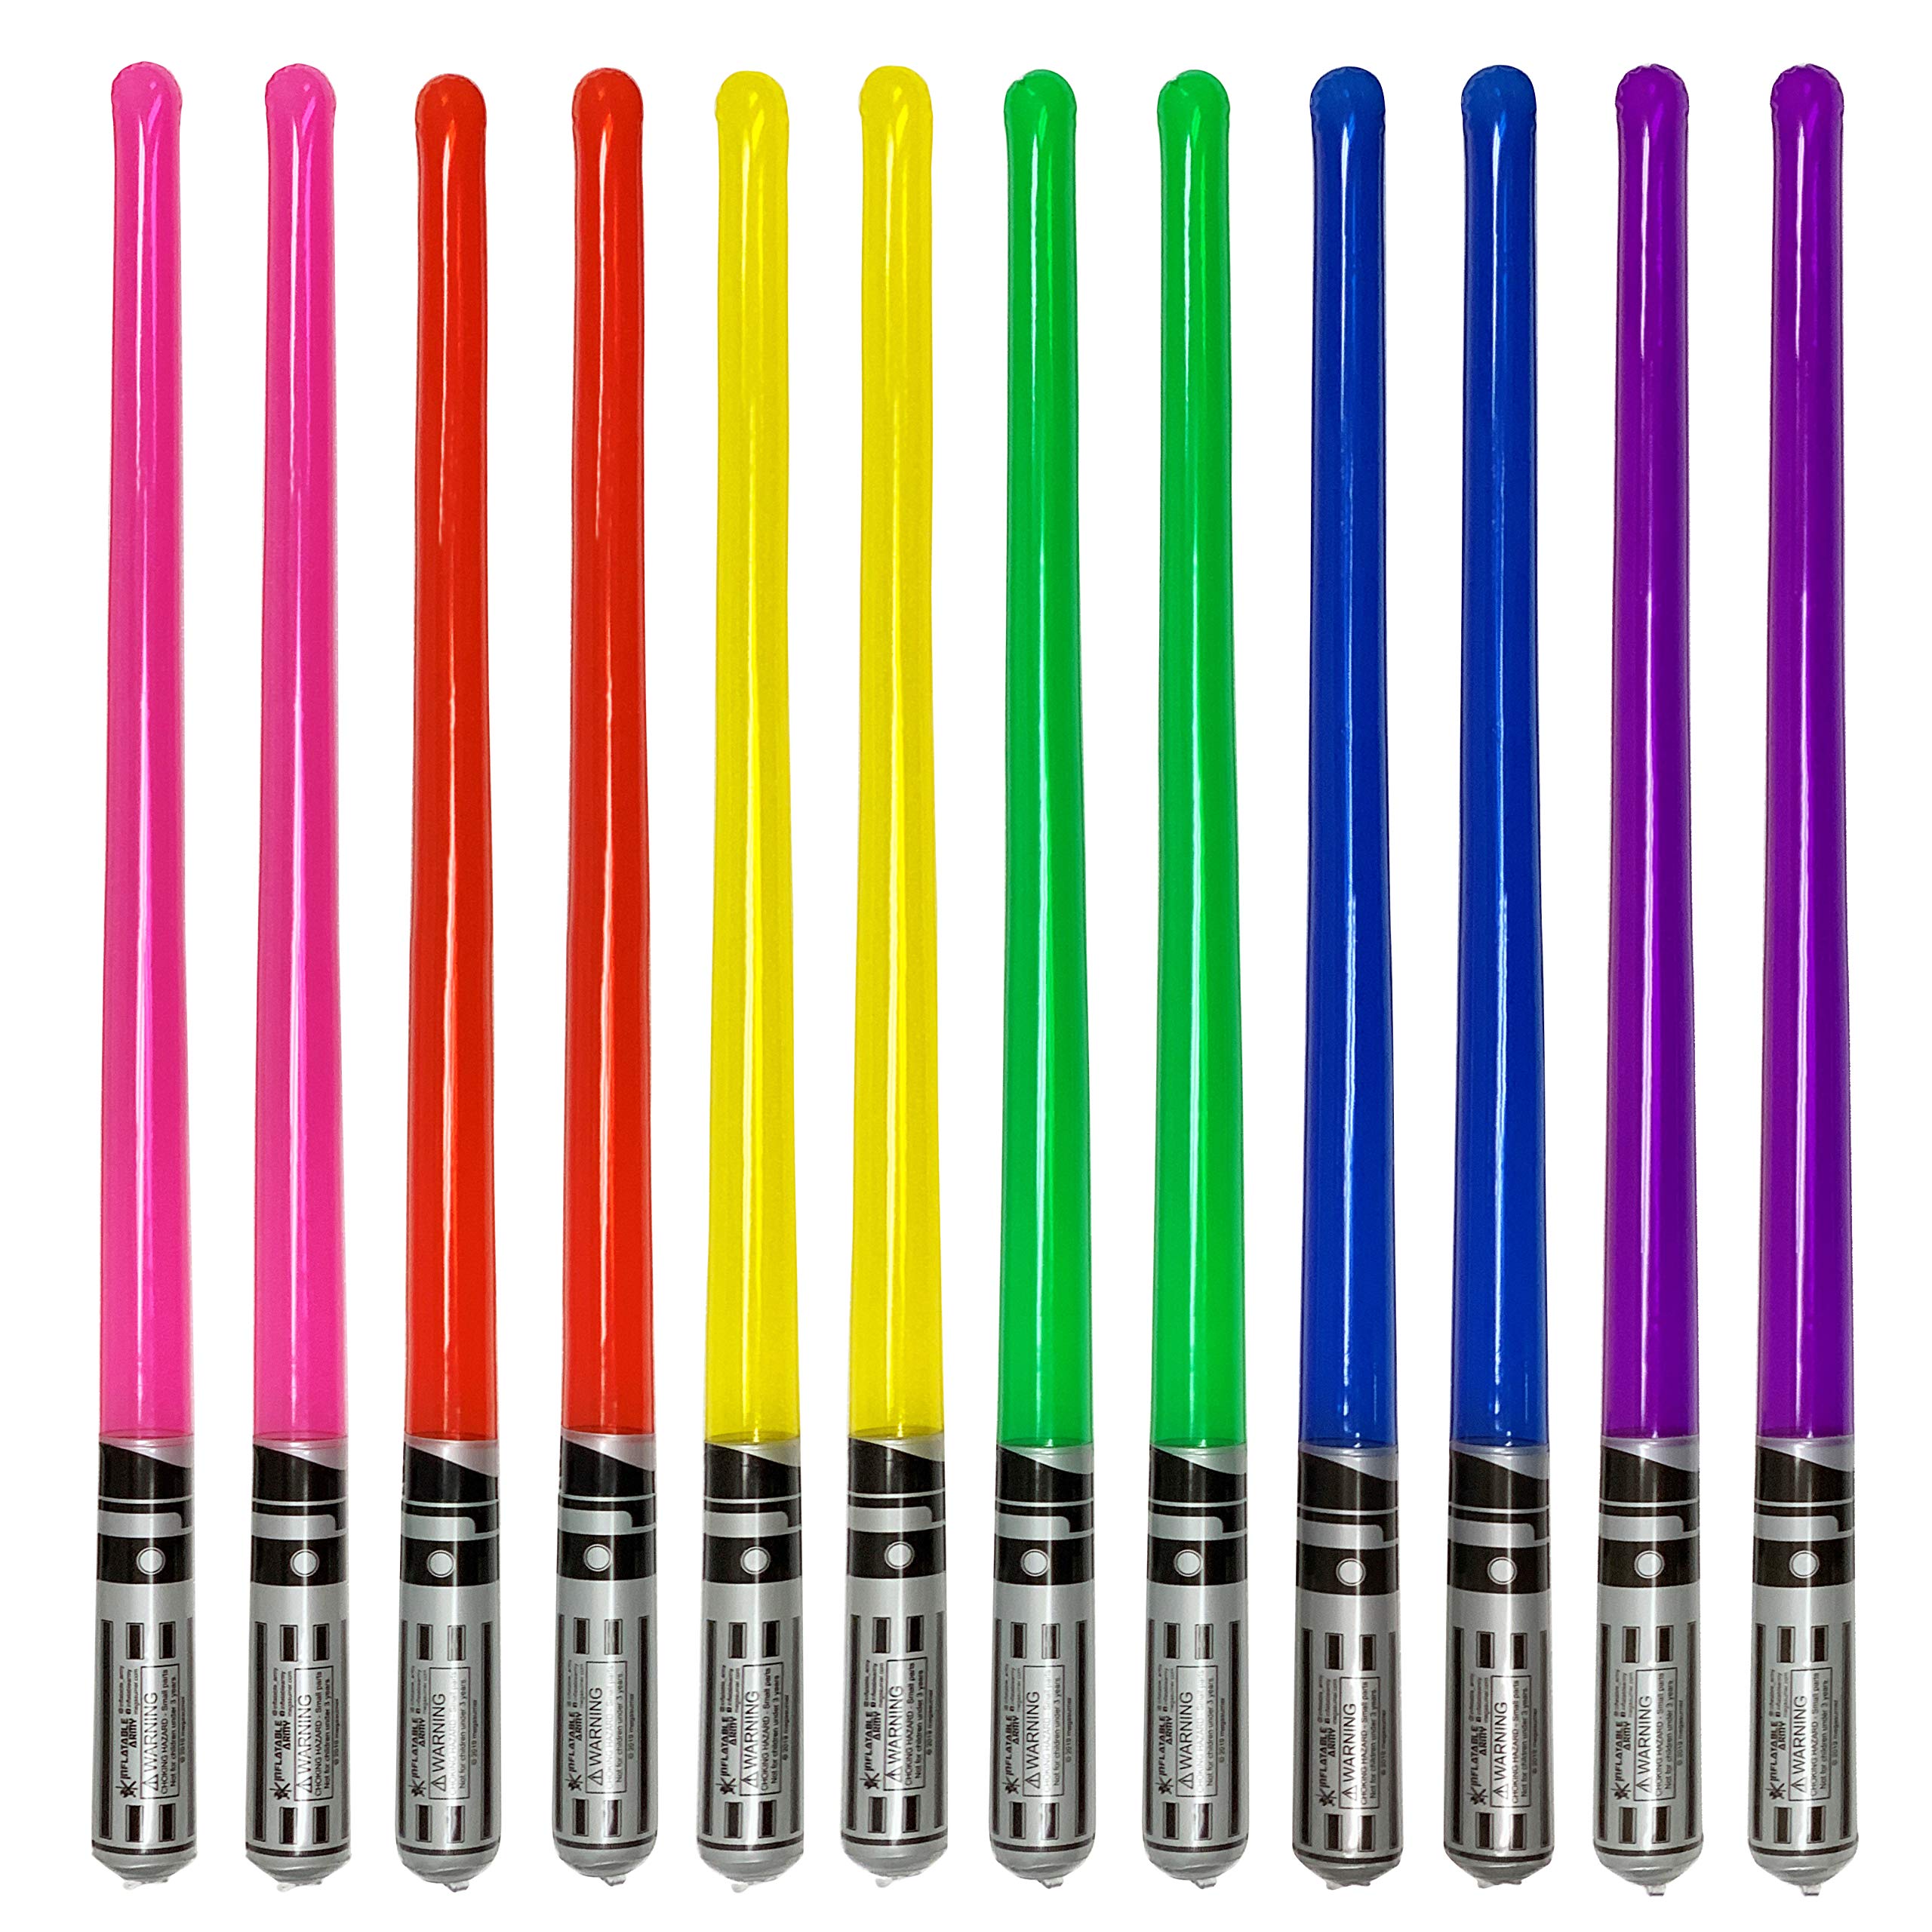 Inflatable Army Pack of 12 "Party Weight" Inflatable Lightsaber- 2 Pink, 2 Red, 2 Yellow, 2 Green, 2 Blue, 2 Purple Rainbow Pack by Inflatable A